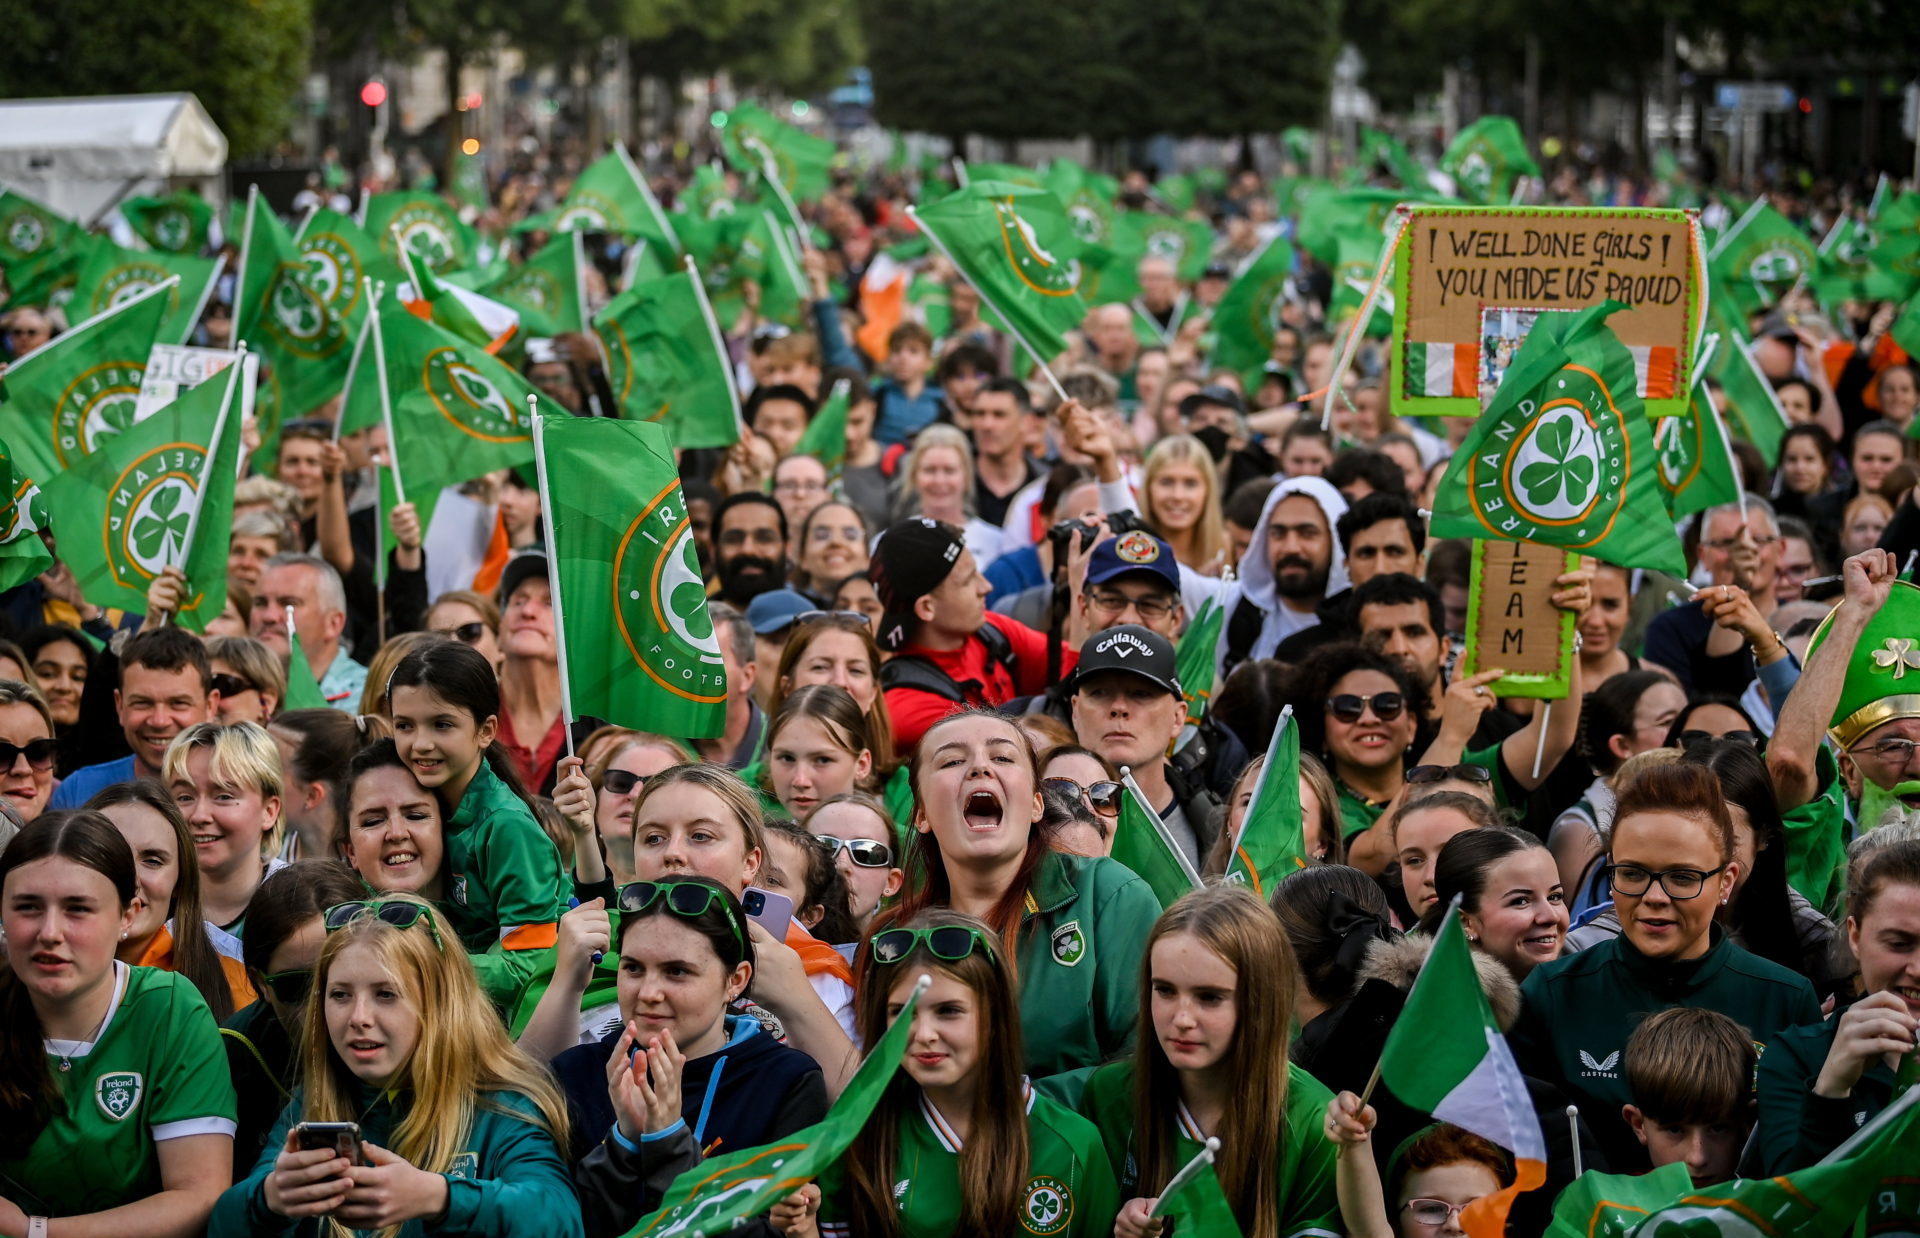 epublic of Ireland supporters during homecoming event on O'Connell Street in Dublin following the FIFA Women's World Cup